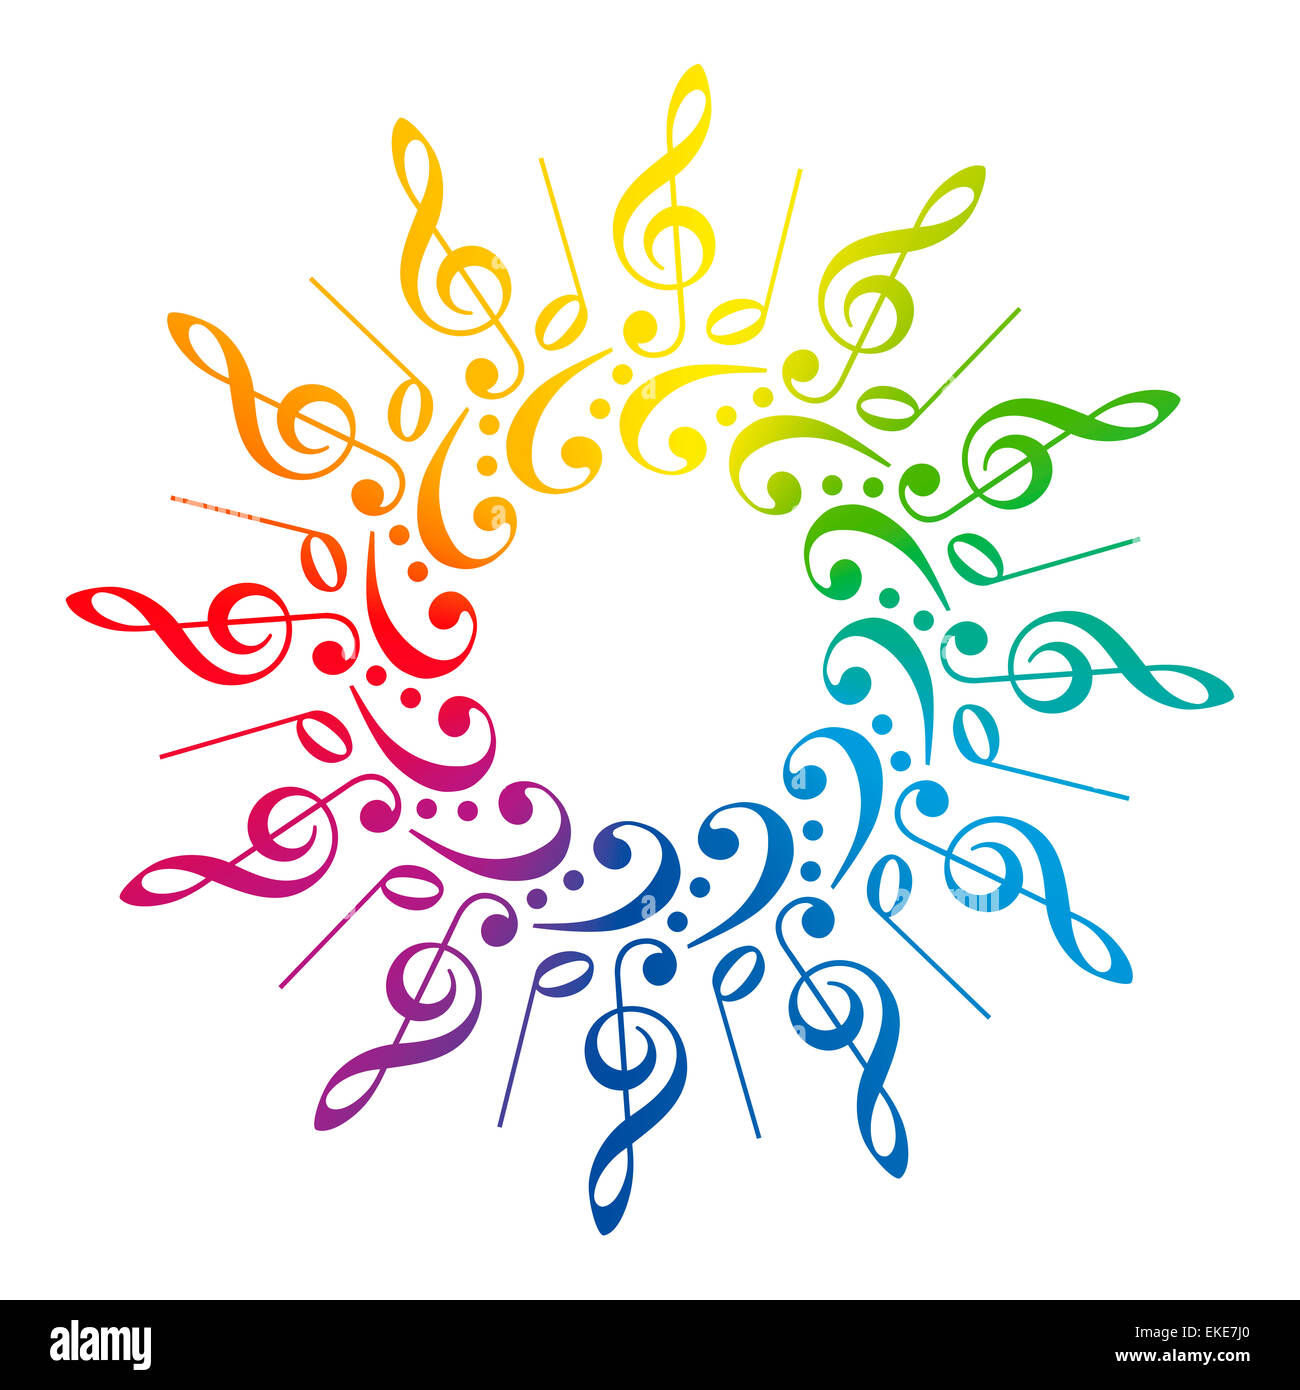 Treble clefs, bass clefs and scores, that form a radial rainbow colored pattern. Stock Photo